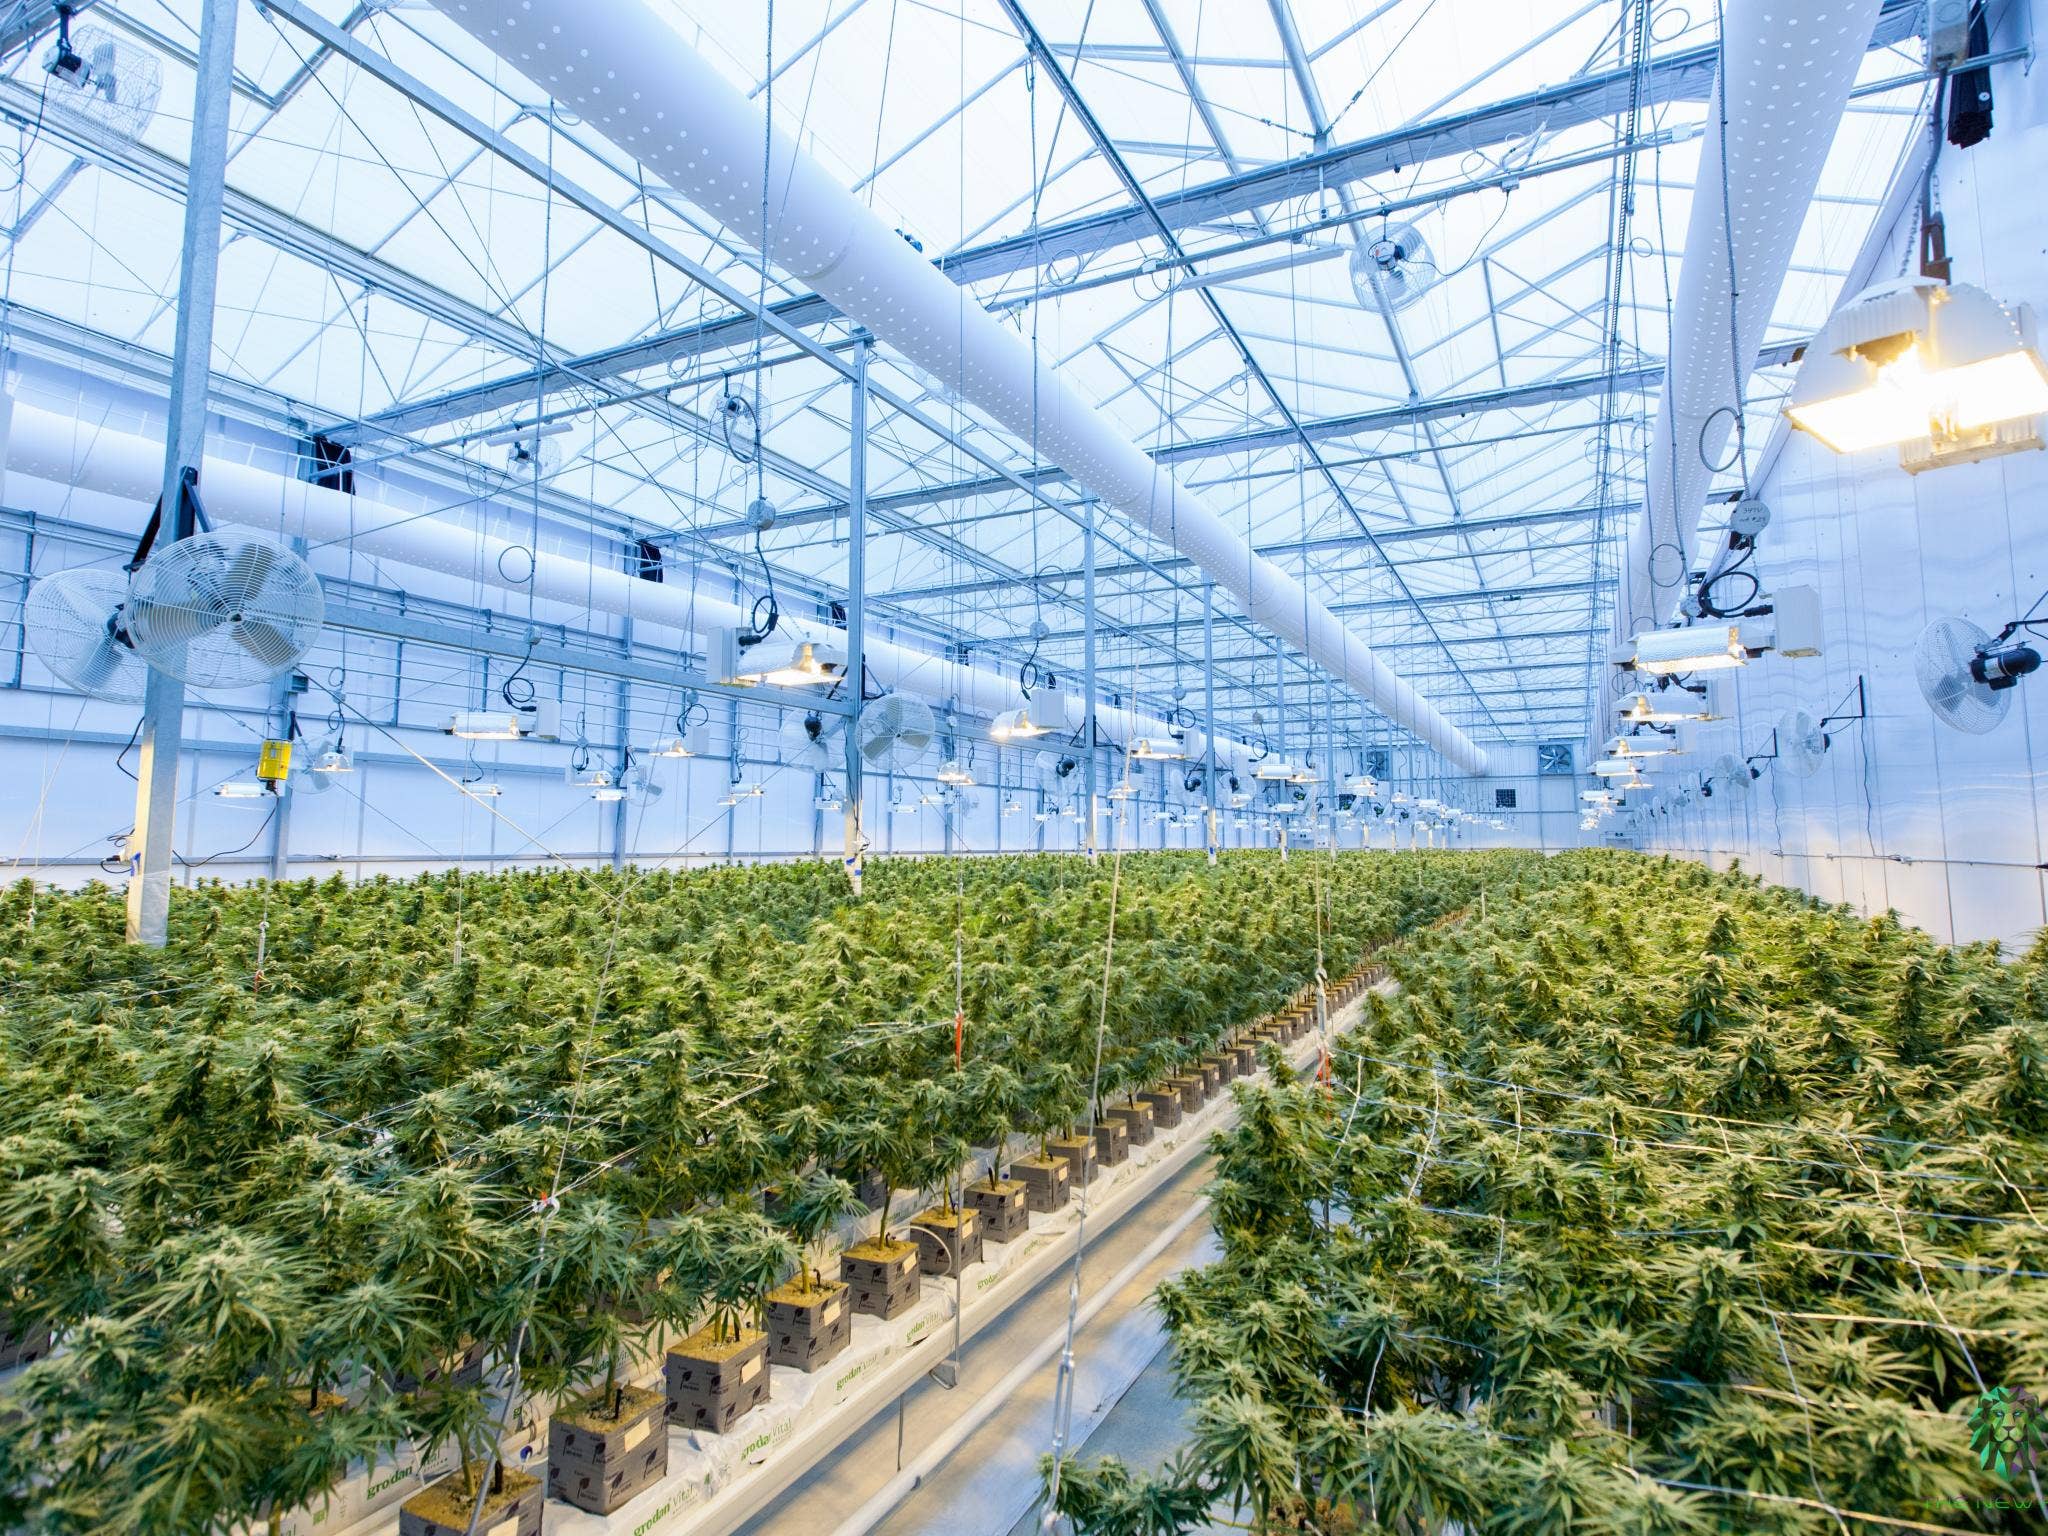 DEA-Endorsed Cannabis Grower Makes History As First 'Plant-Touching' Firm On NASDAQ, Shares Soared